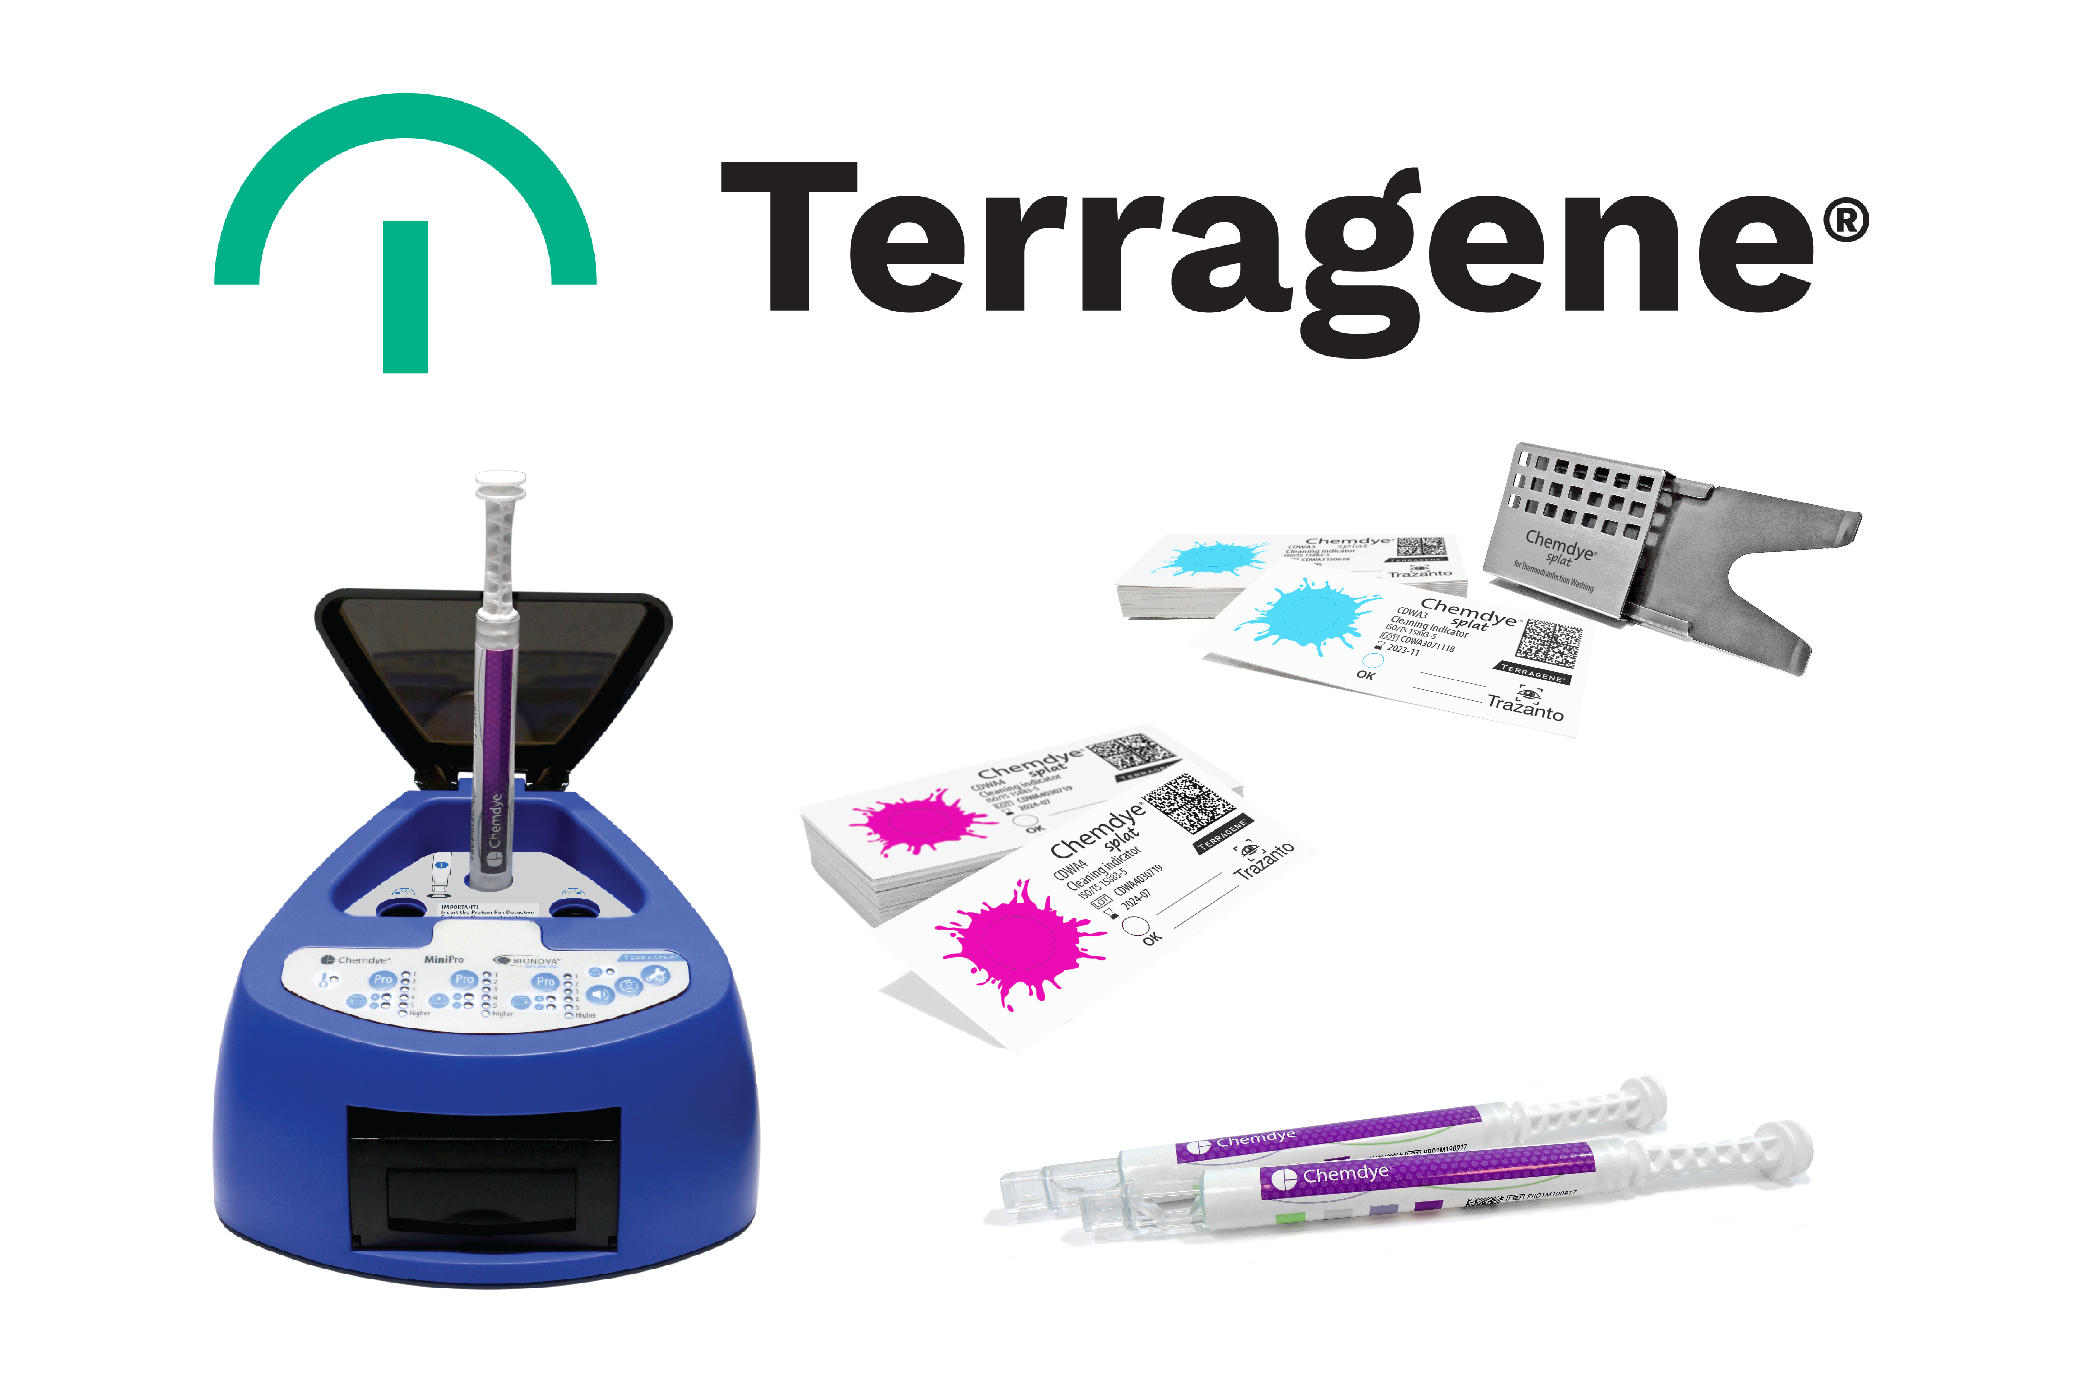 Terragene infection control washers